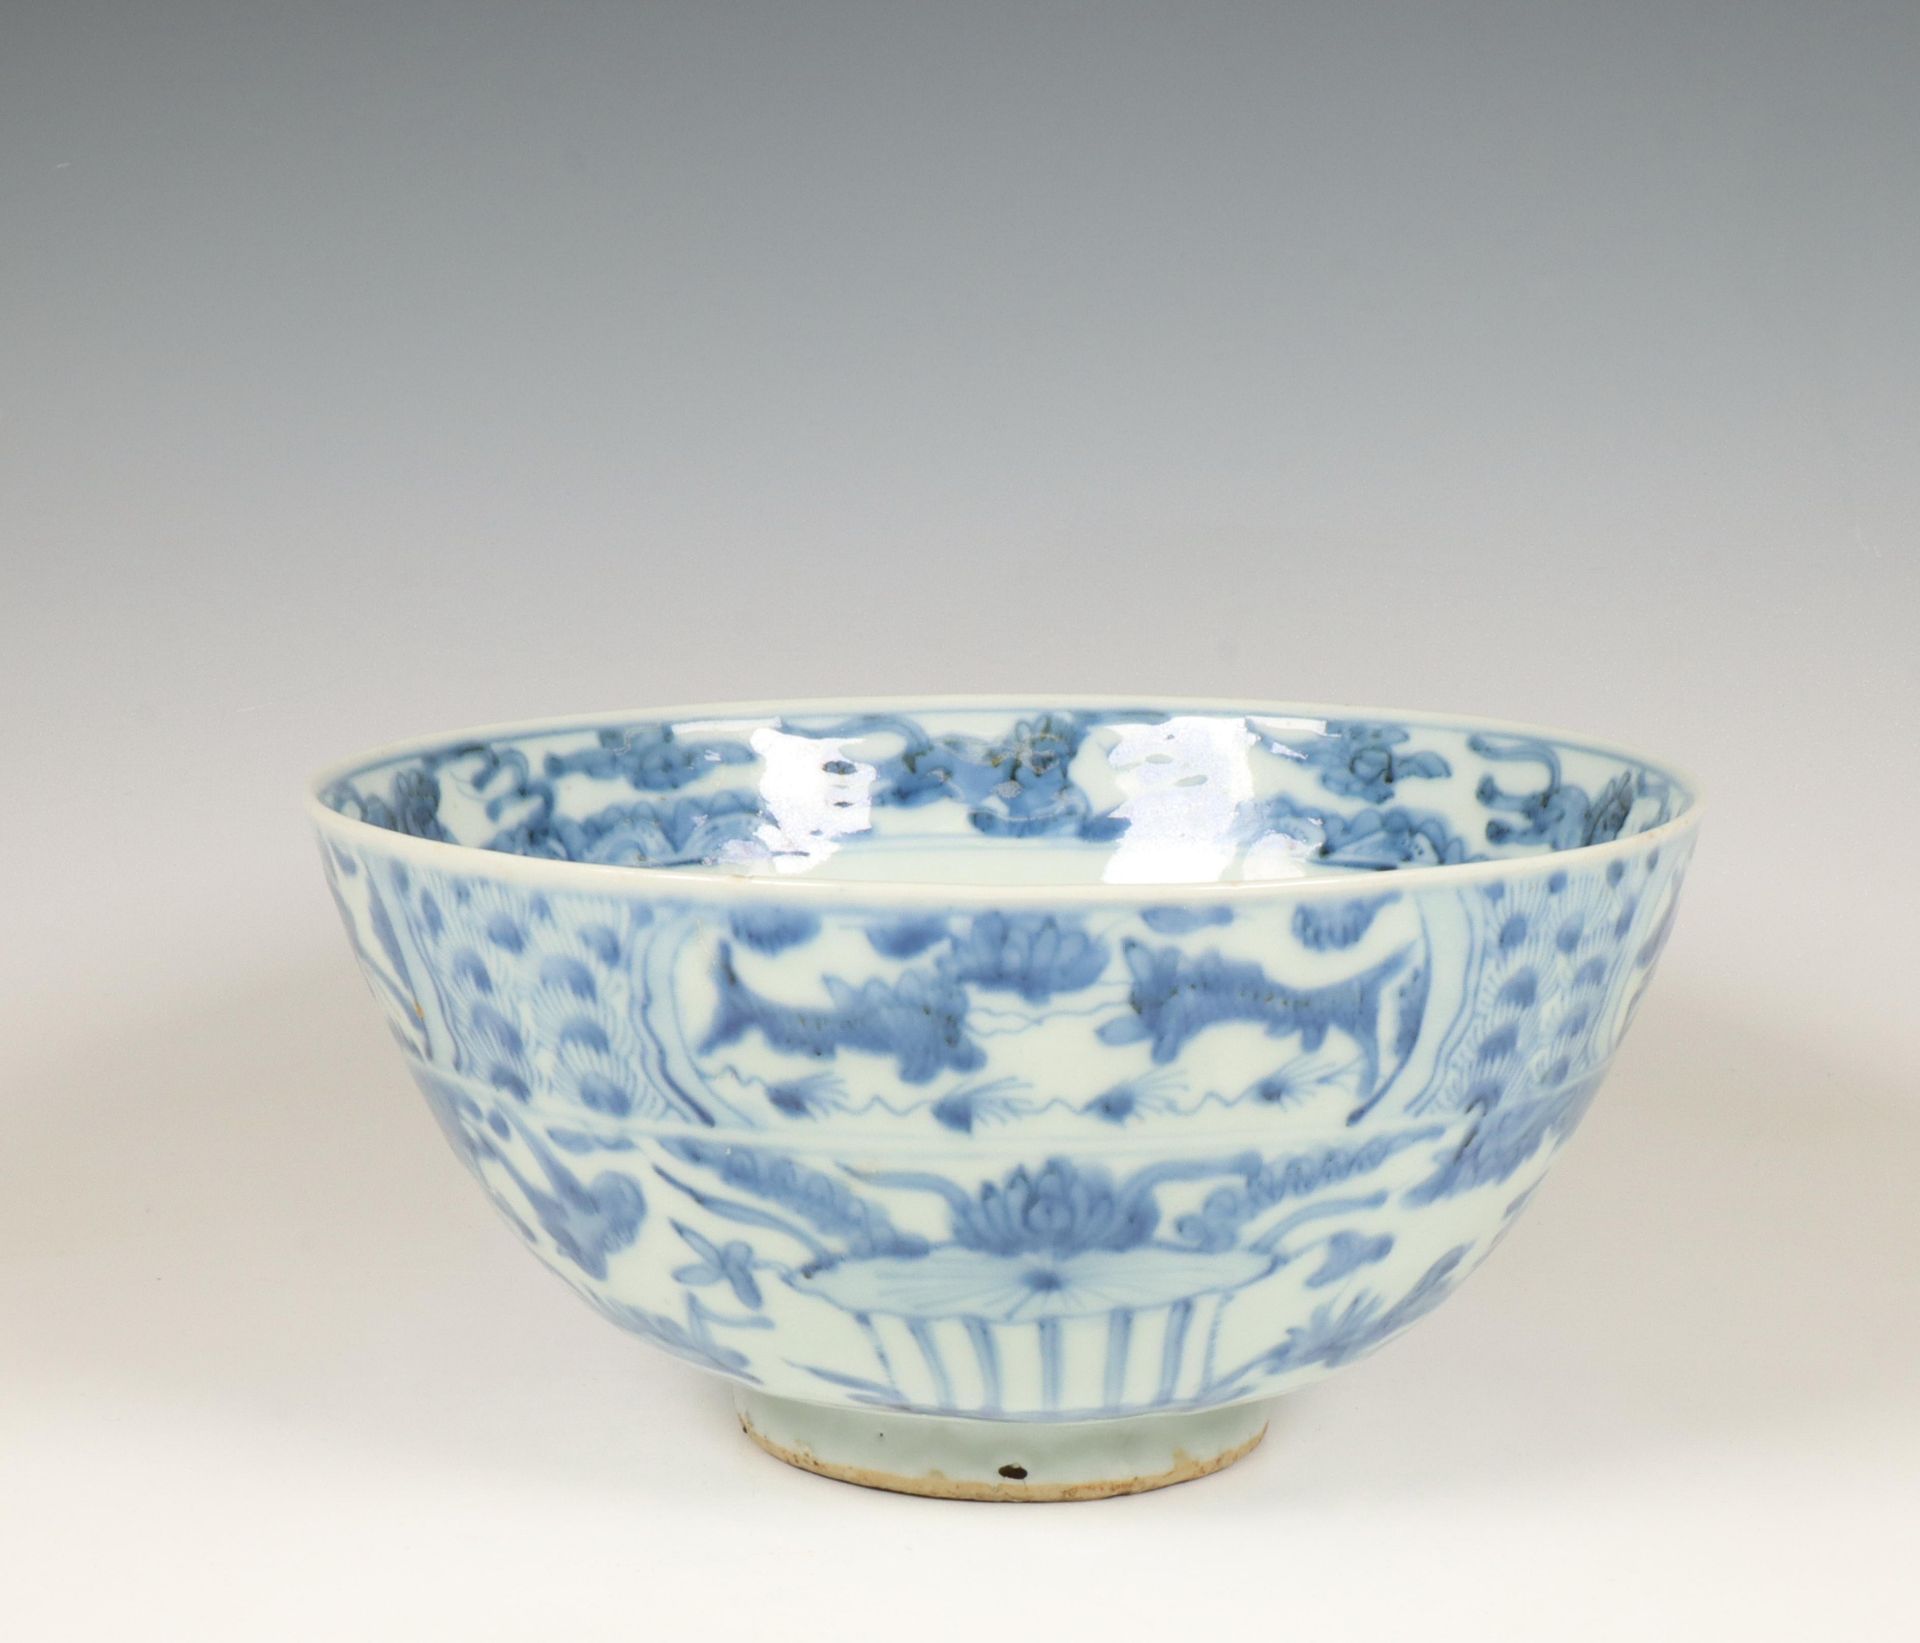 China, a blue and white porcelain bowl, late Ming dynasty (1368-1644),